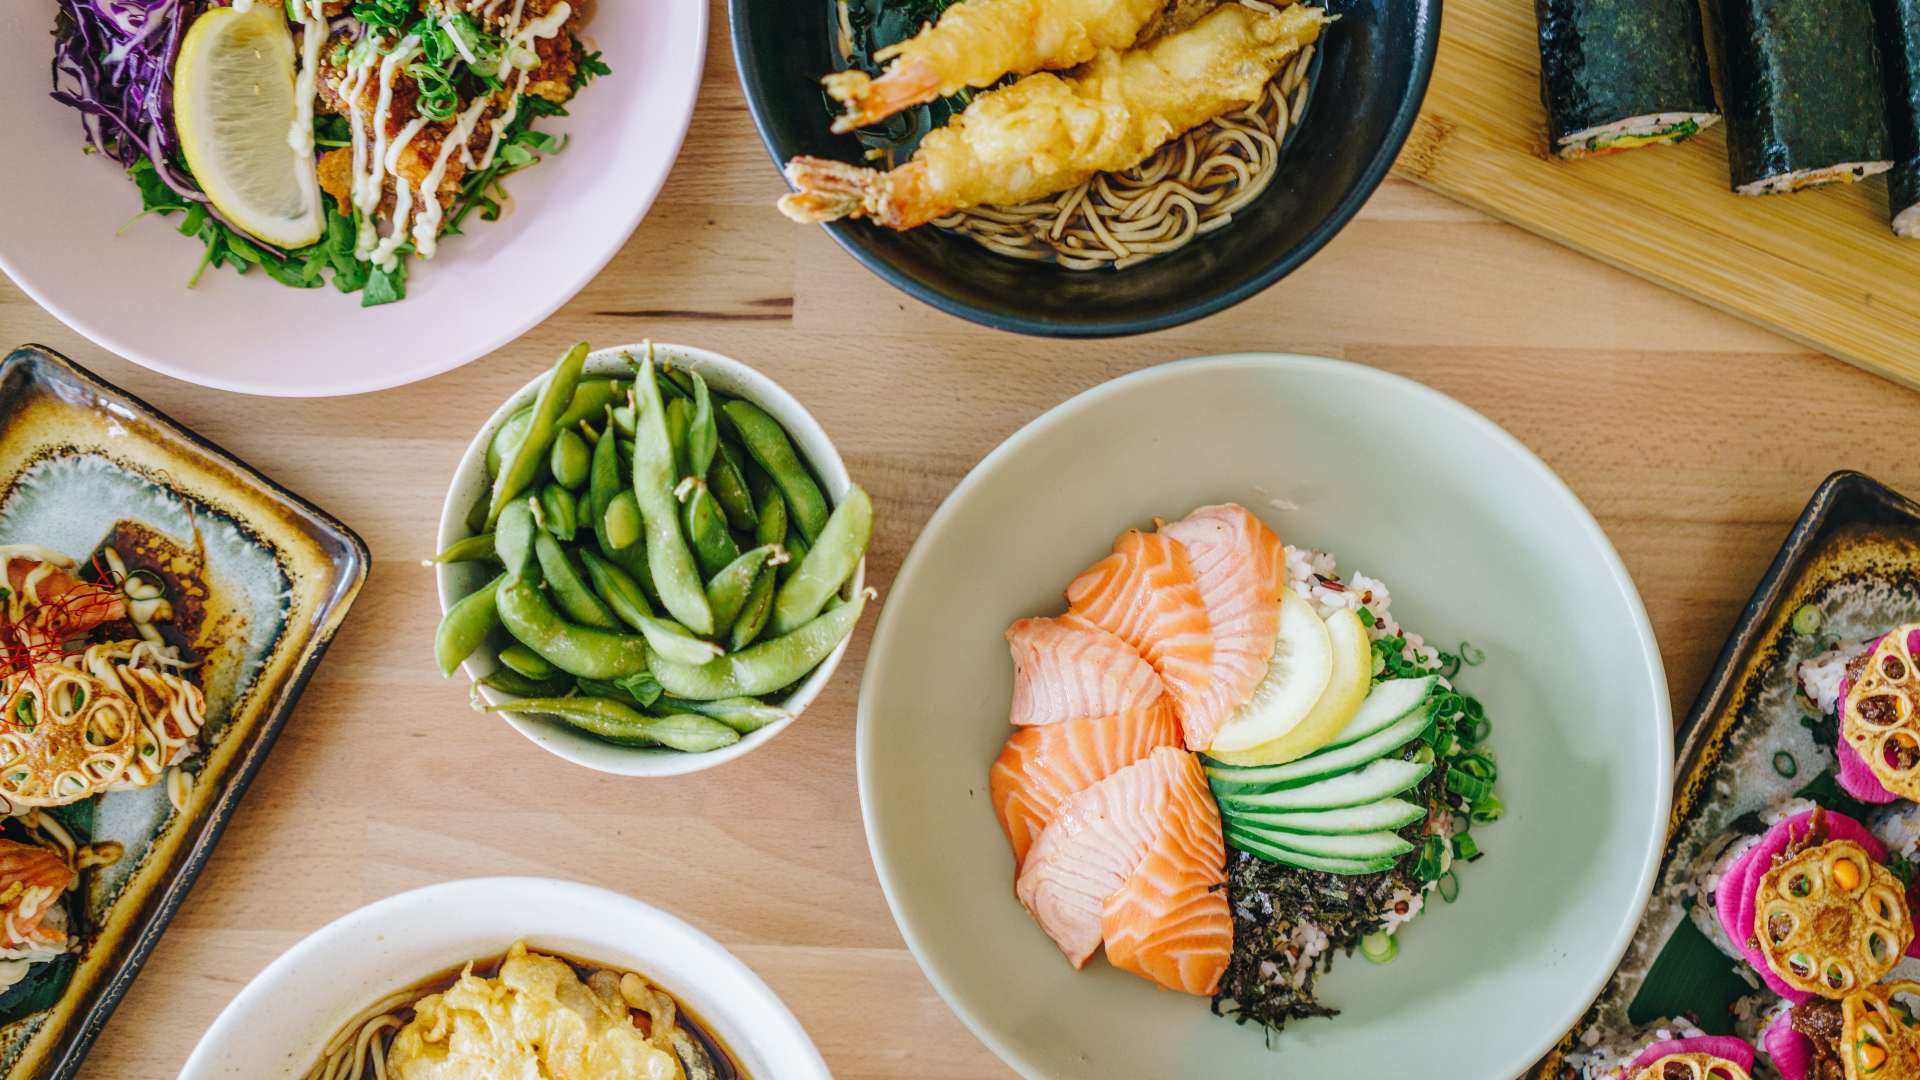 EziStreat Is North Melbourne's New Hawker-Style Food Hall Serving Up Eats From Around the Globe